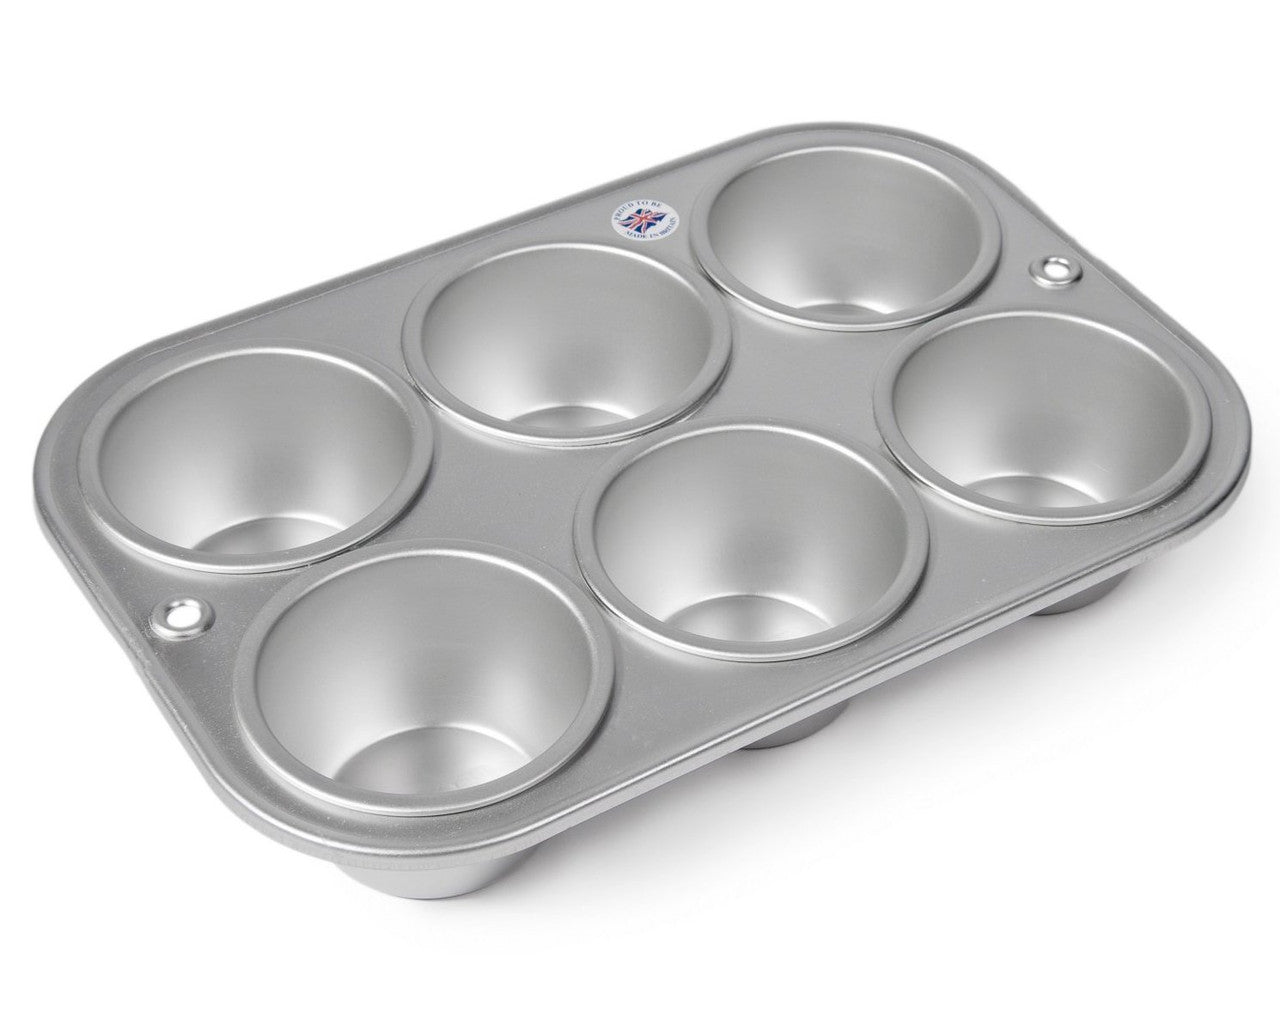 6 Cup 6 oz Mini Pudding Tray from Silverwood Bakeware. Handmade in the UK.